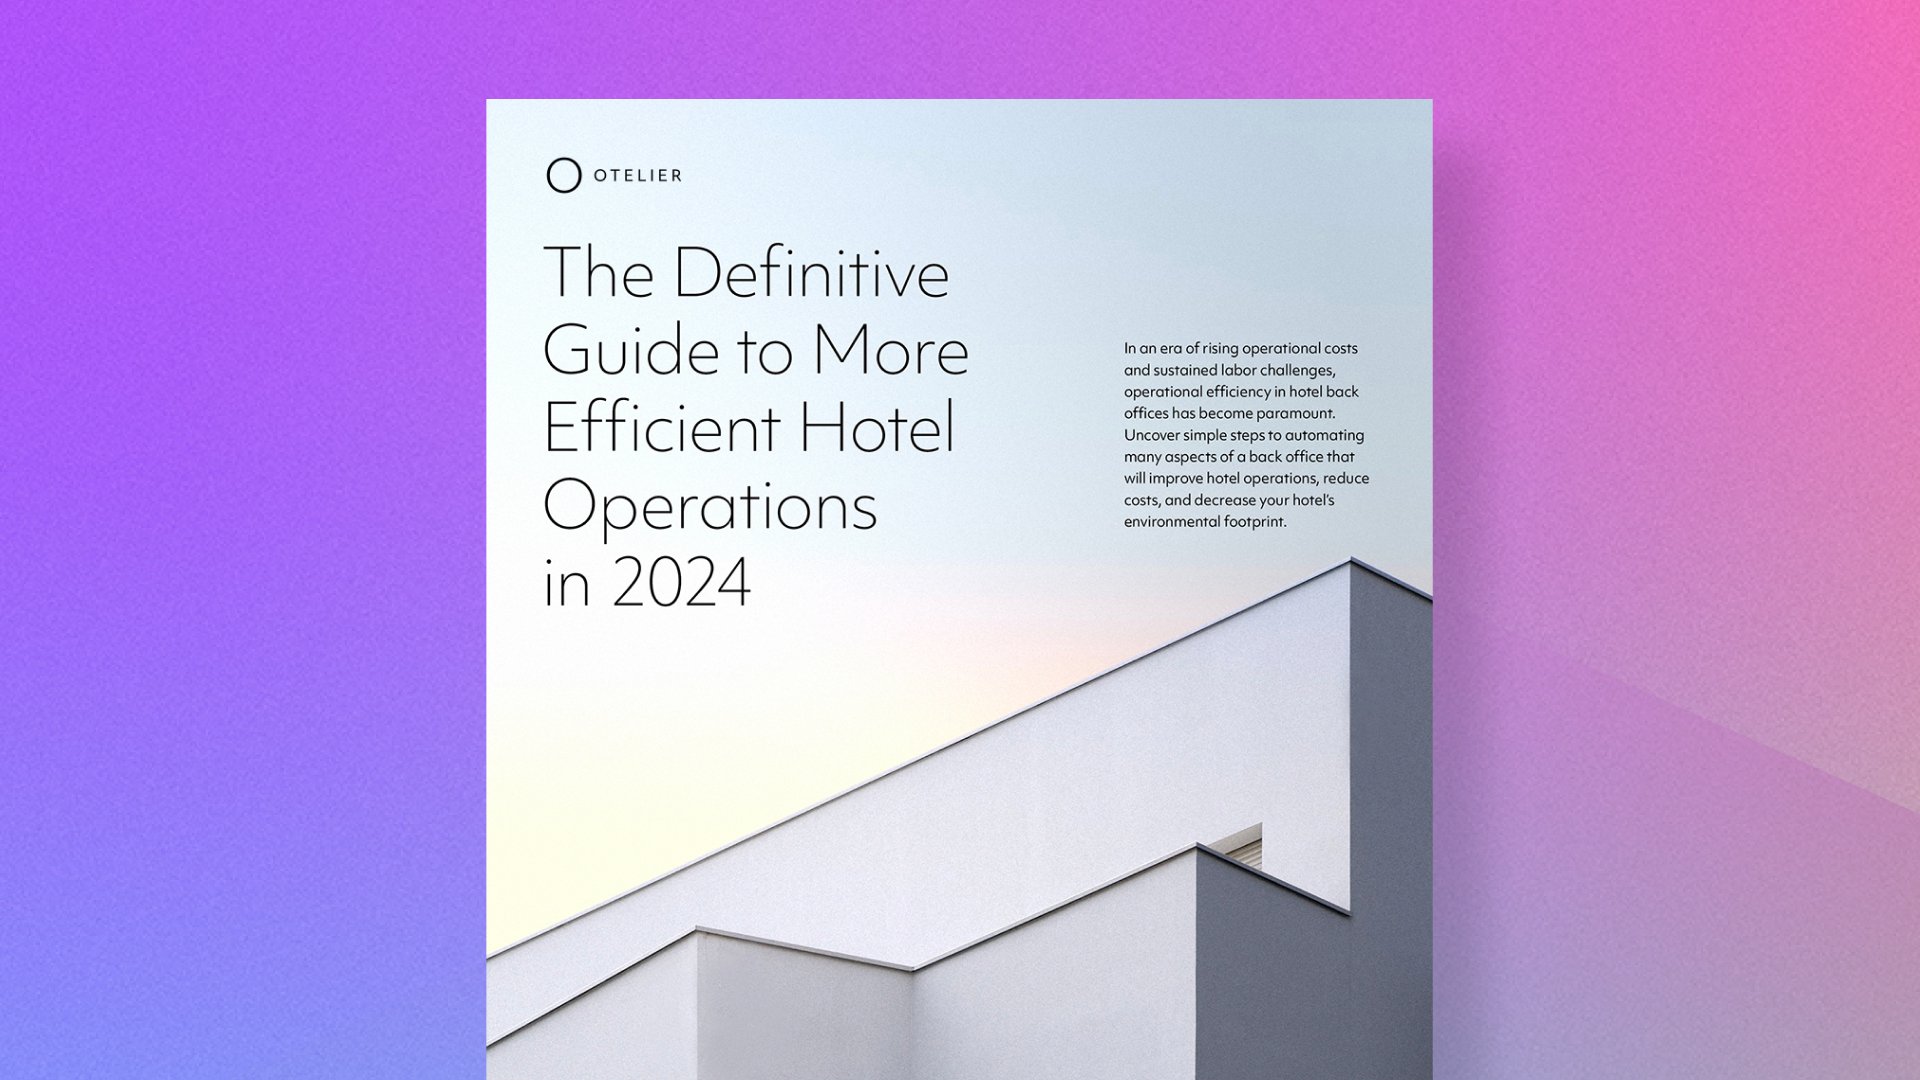 The Definitive Guide To More Efficient Hotel Operations In 2024